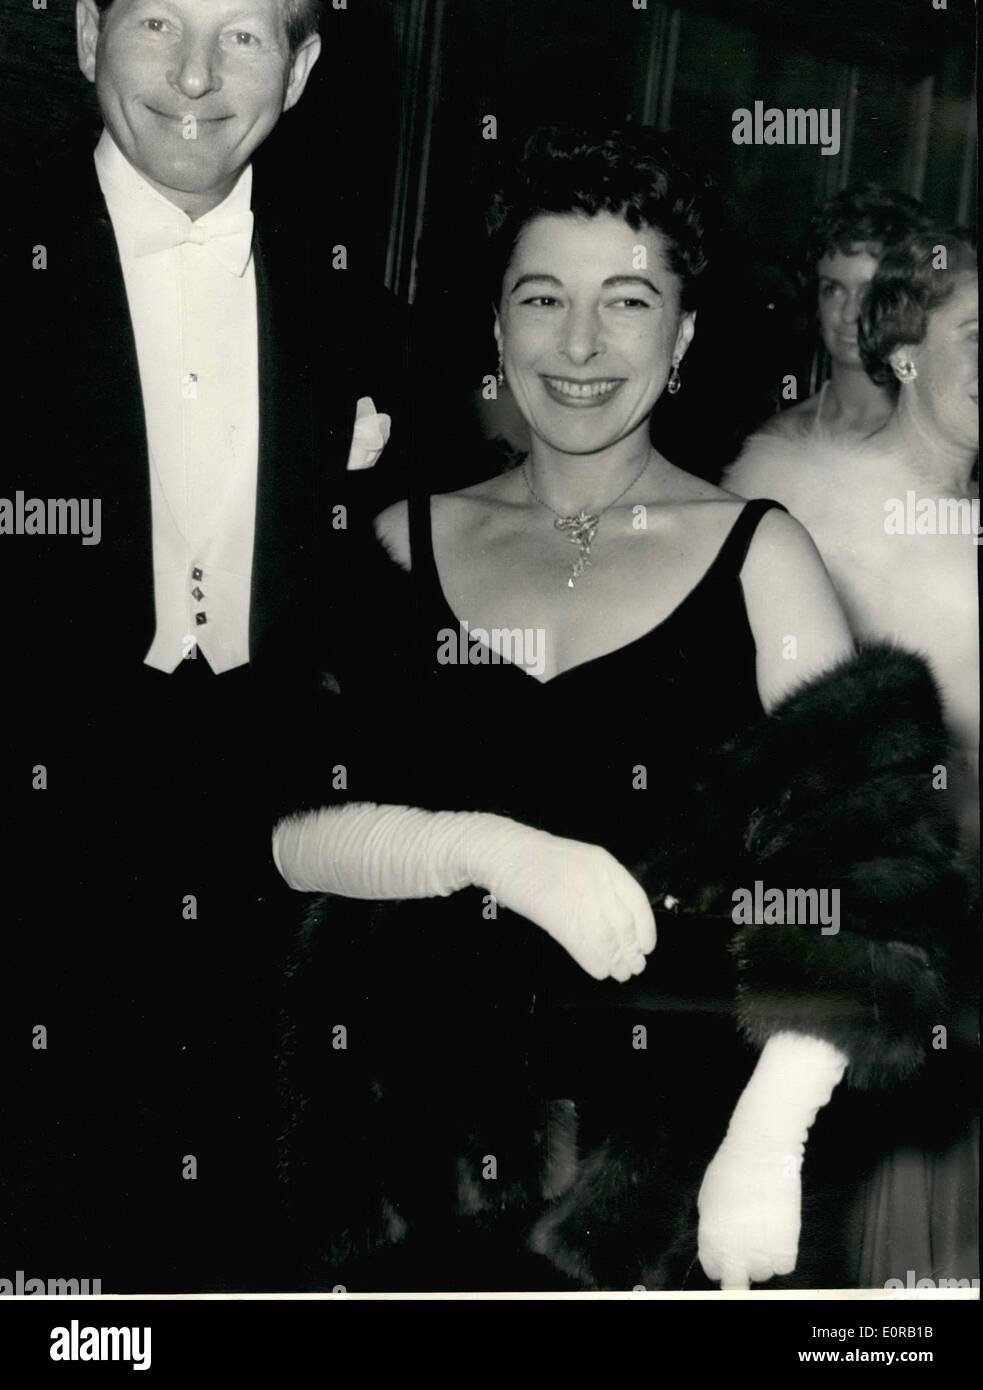 Oct. 10, 1958 - Queen Attends Film Premiere Danny Kaye Arrived - HM THE QUEEN ATTENDED THE PREMIERE THIS EVENING AT THE ODEON, LEICESTER SQUERE - OF ''ME AND THE COLONEL'' BIPPA PHOTO SHOWS:- DANKU KAYE and his wife (Sylvia Fine) arrives for the premiere this evening. Stock Photo